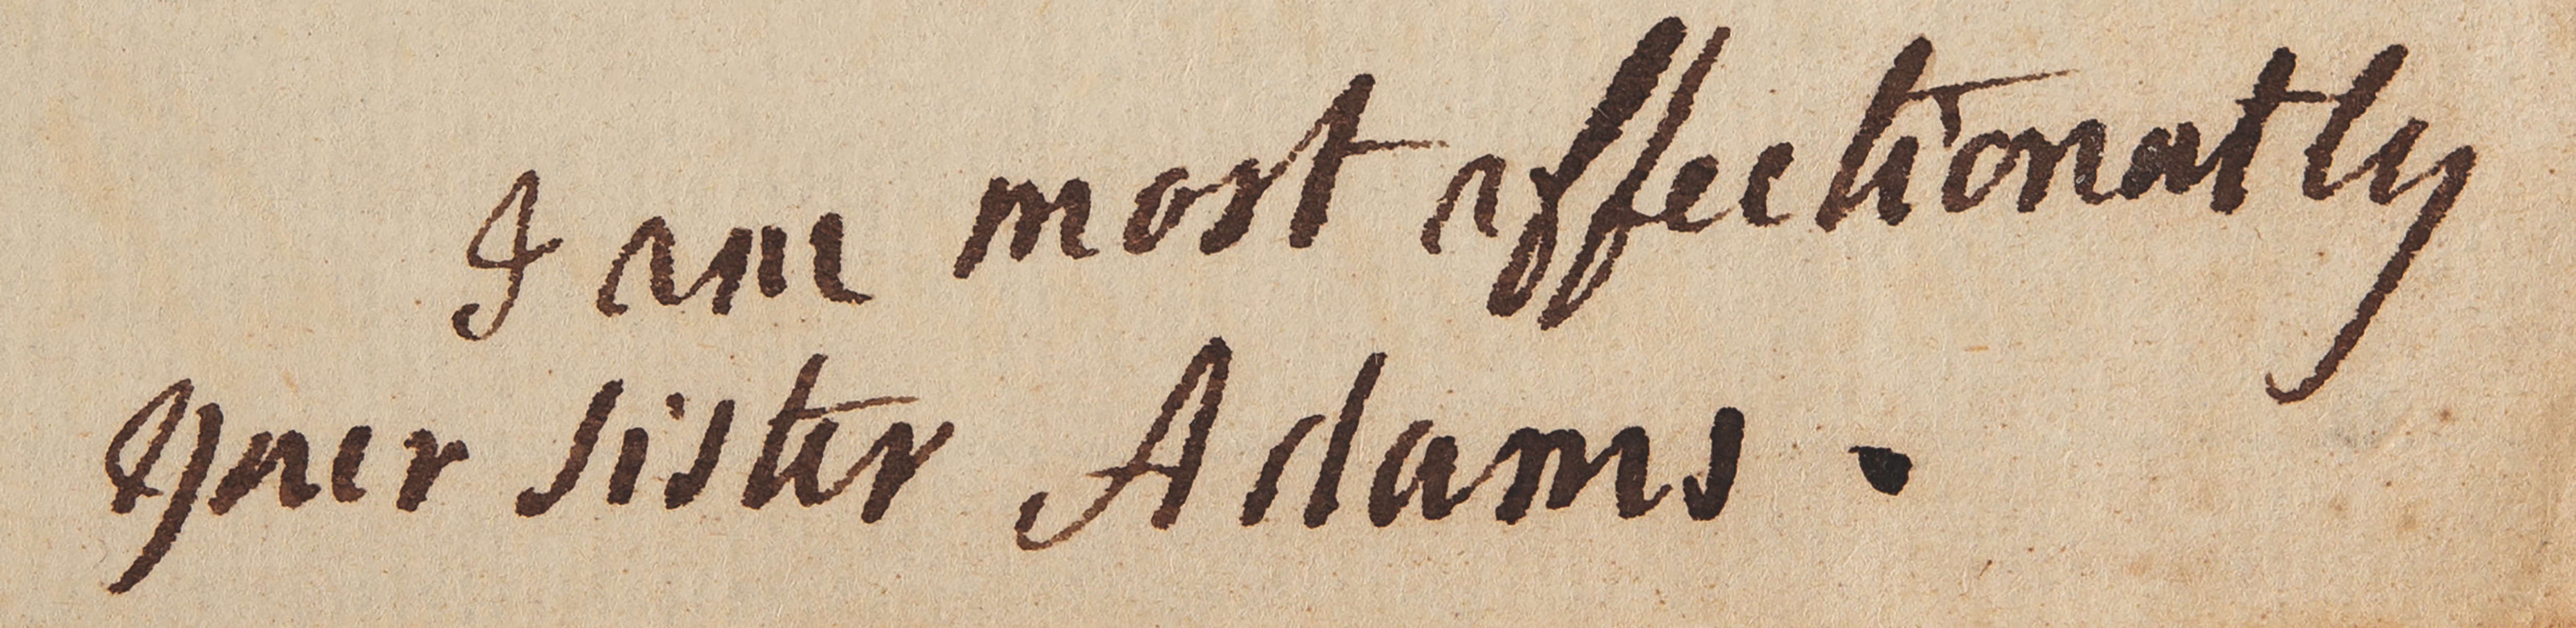 Lot #6004 Abigail Adams Autograph Letter Signed as First Lady on French Revolution: "National Degradation and unparalled corruption" - Image 6